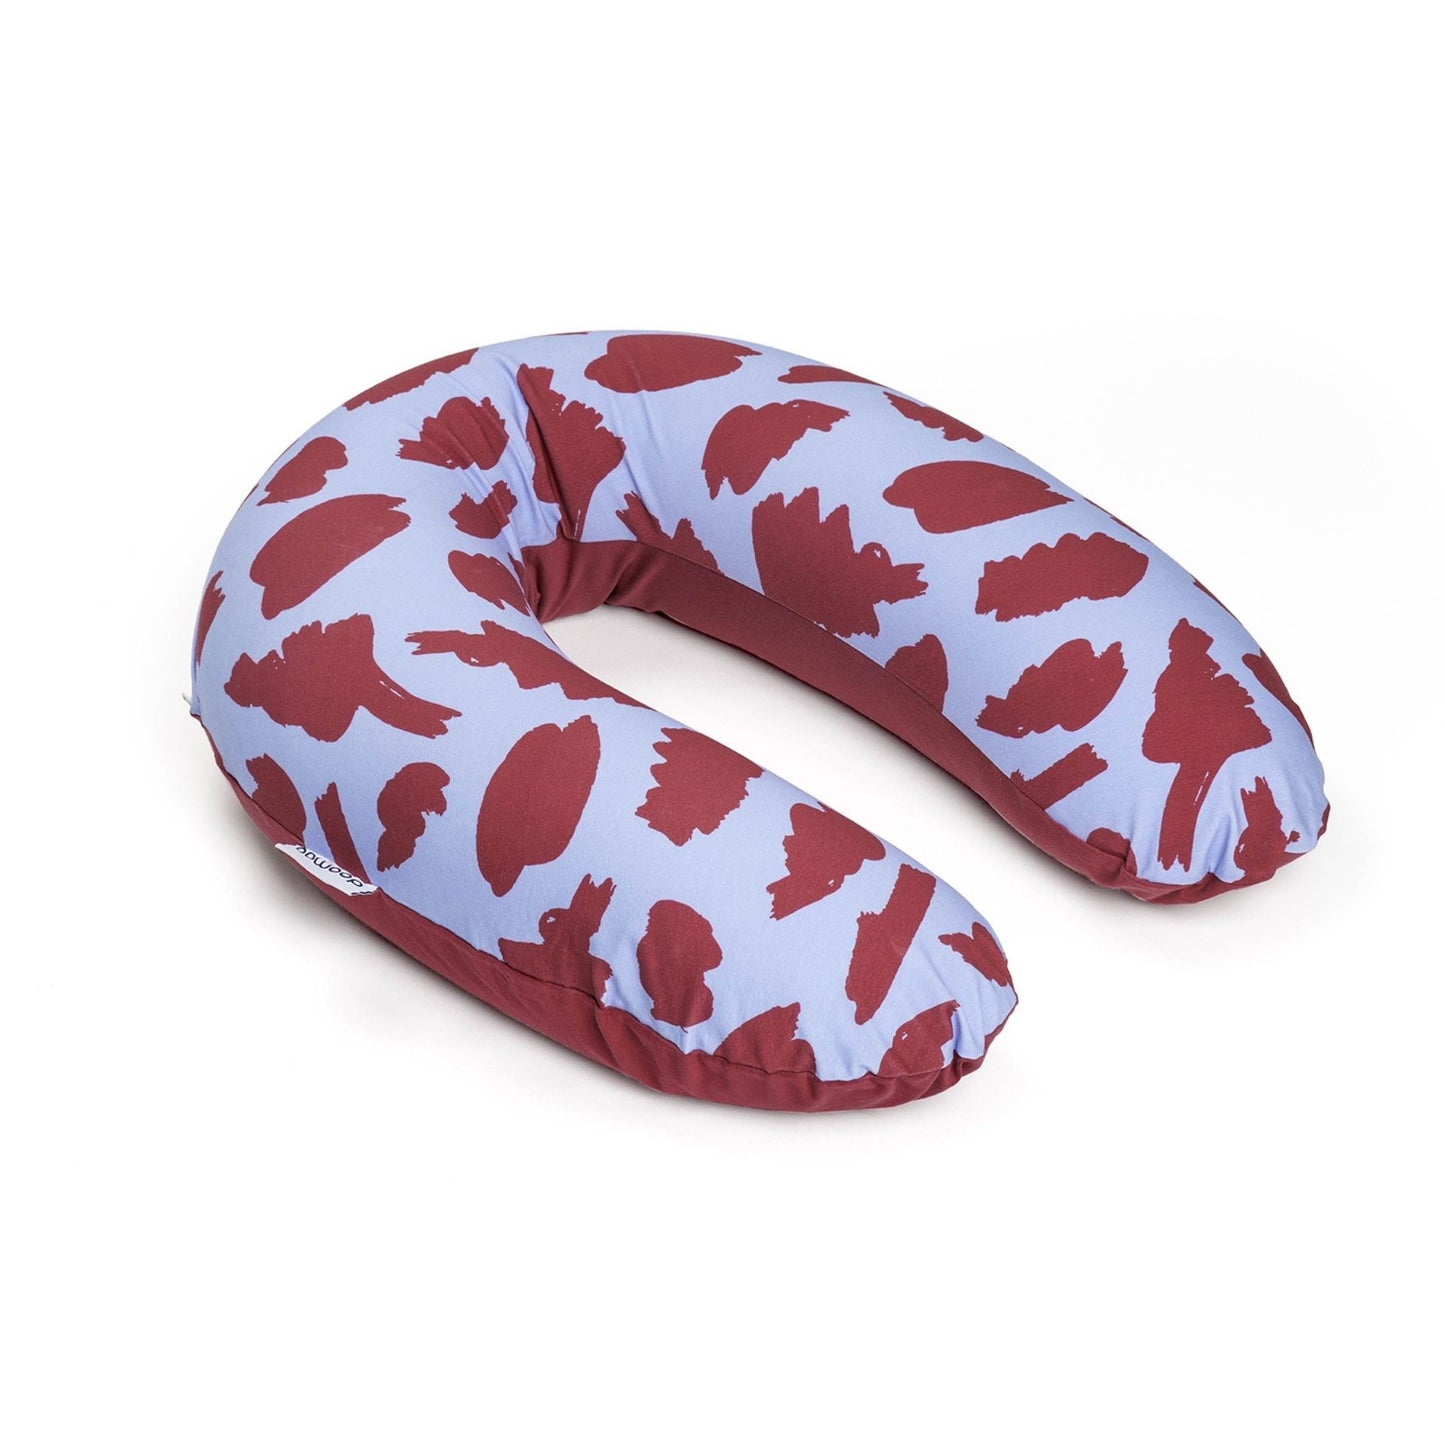 large maternity pillow. During pregnancy and for breastfeeding - Brushes Ruby